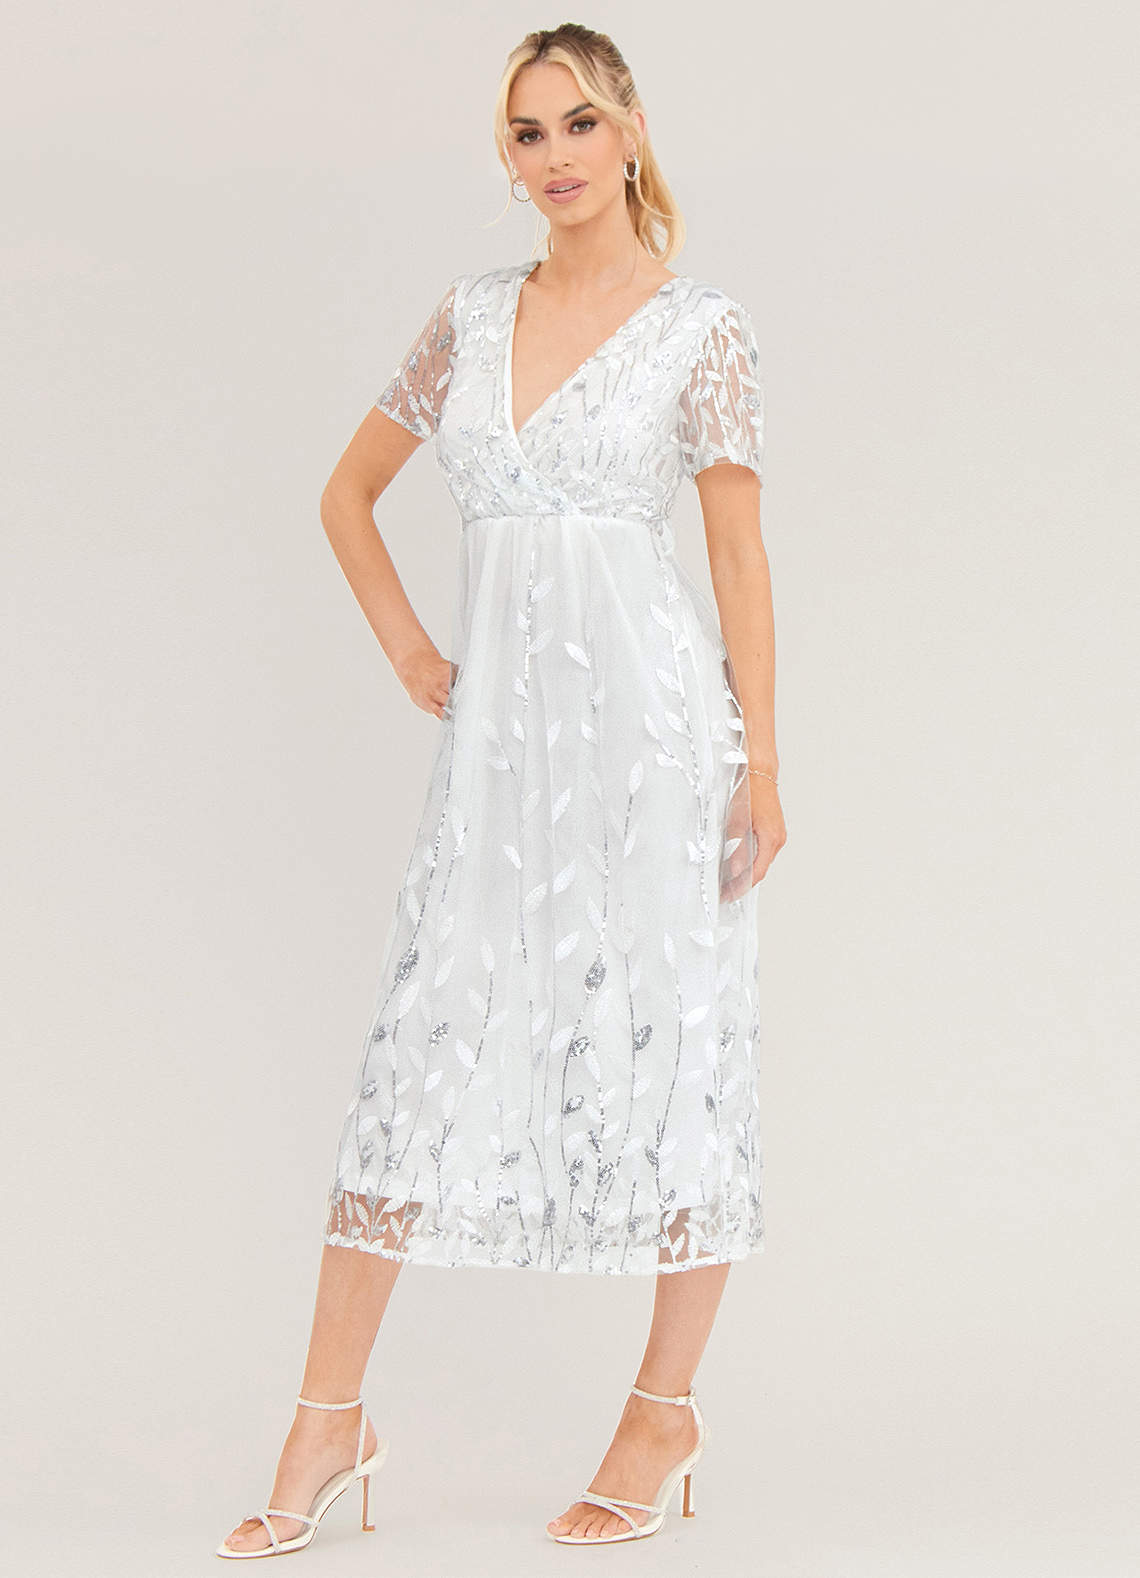 Light Up Beauty White Floral Sequin Short Sleeve Maxi Dress image1